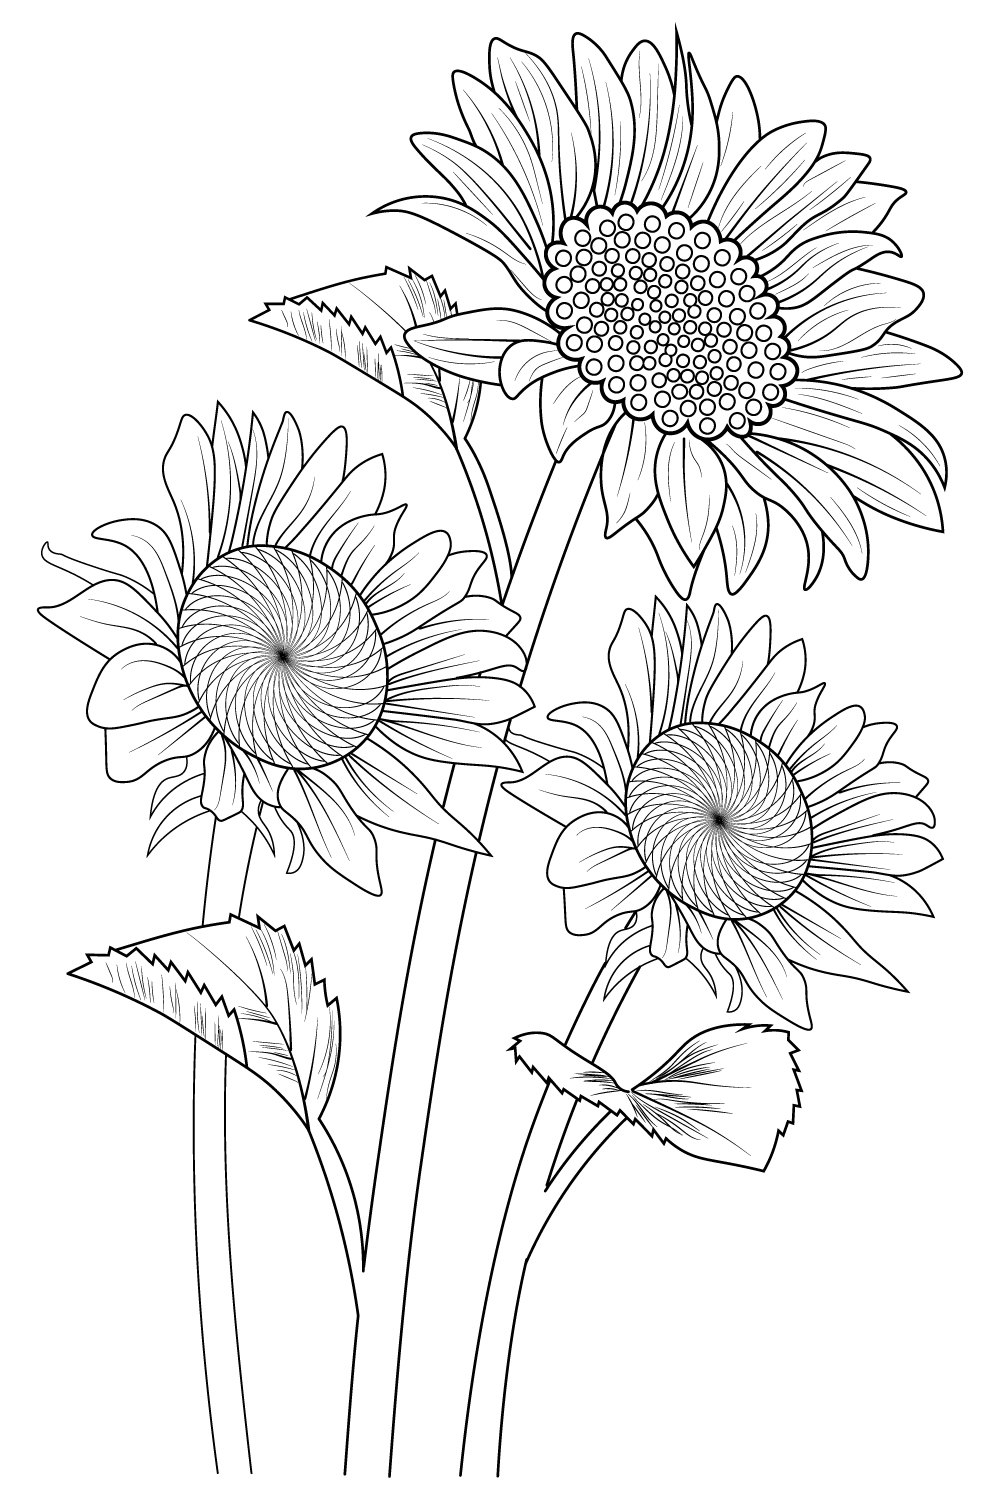 sunflower line art, floral vector illustration, vintage engraved style flowers with sunflowers isolated on white background, and hand-drawn botanical sunflowers botanical illustration sunflower botanical drawing, beautiful monochrome sunflower vector sketch blossom sunflower drawing branch vector illustration pinterest preview image.